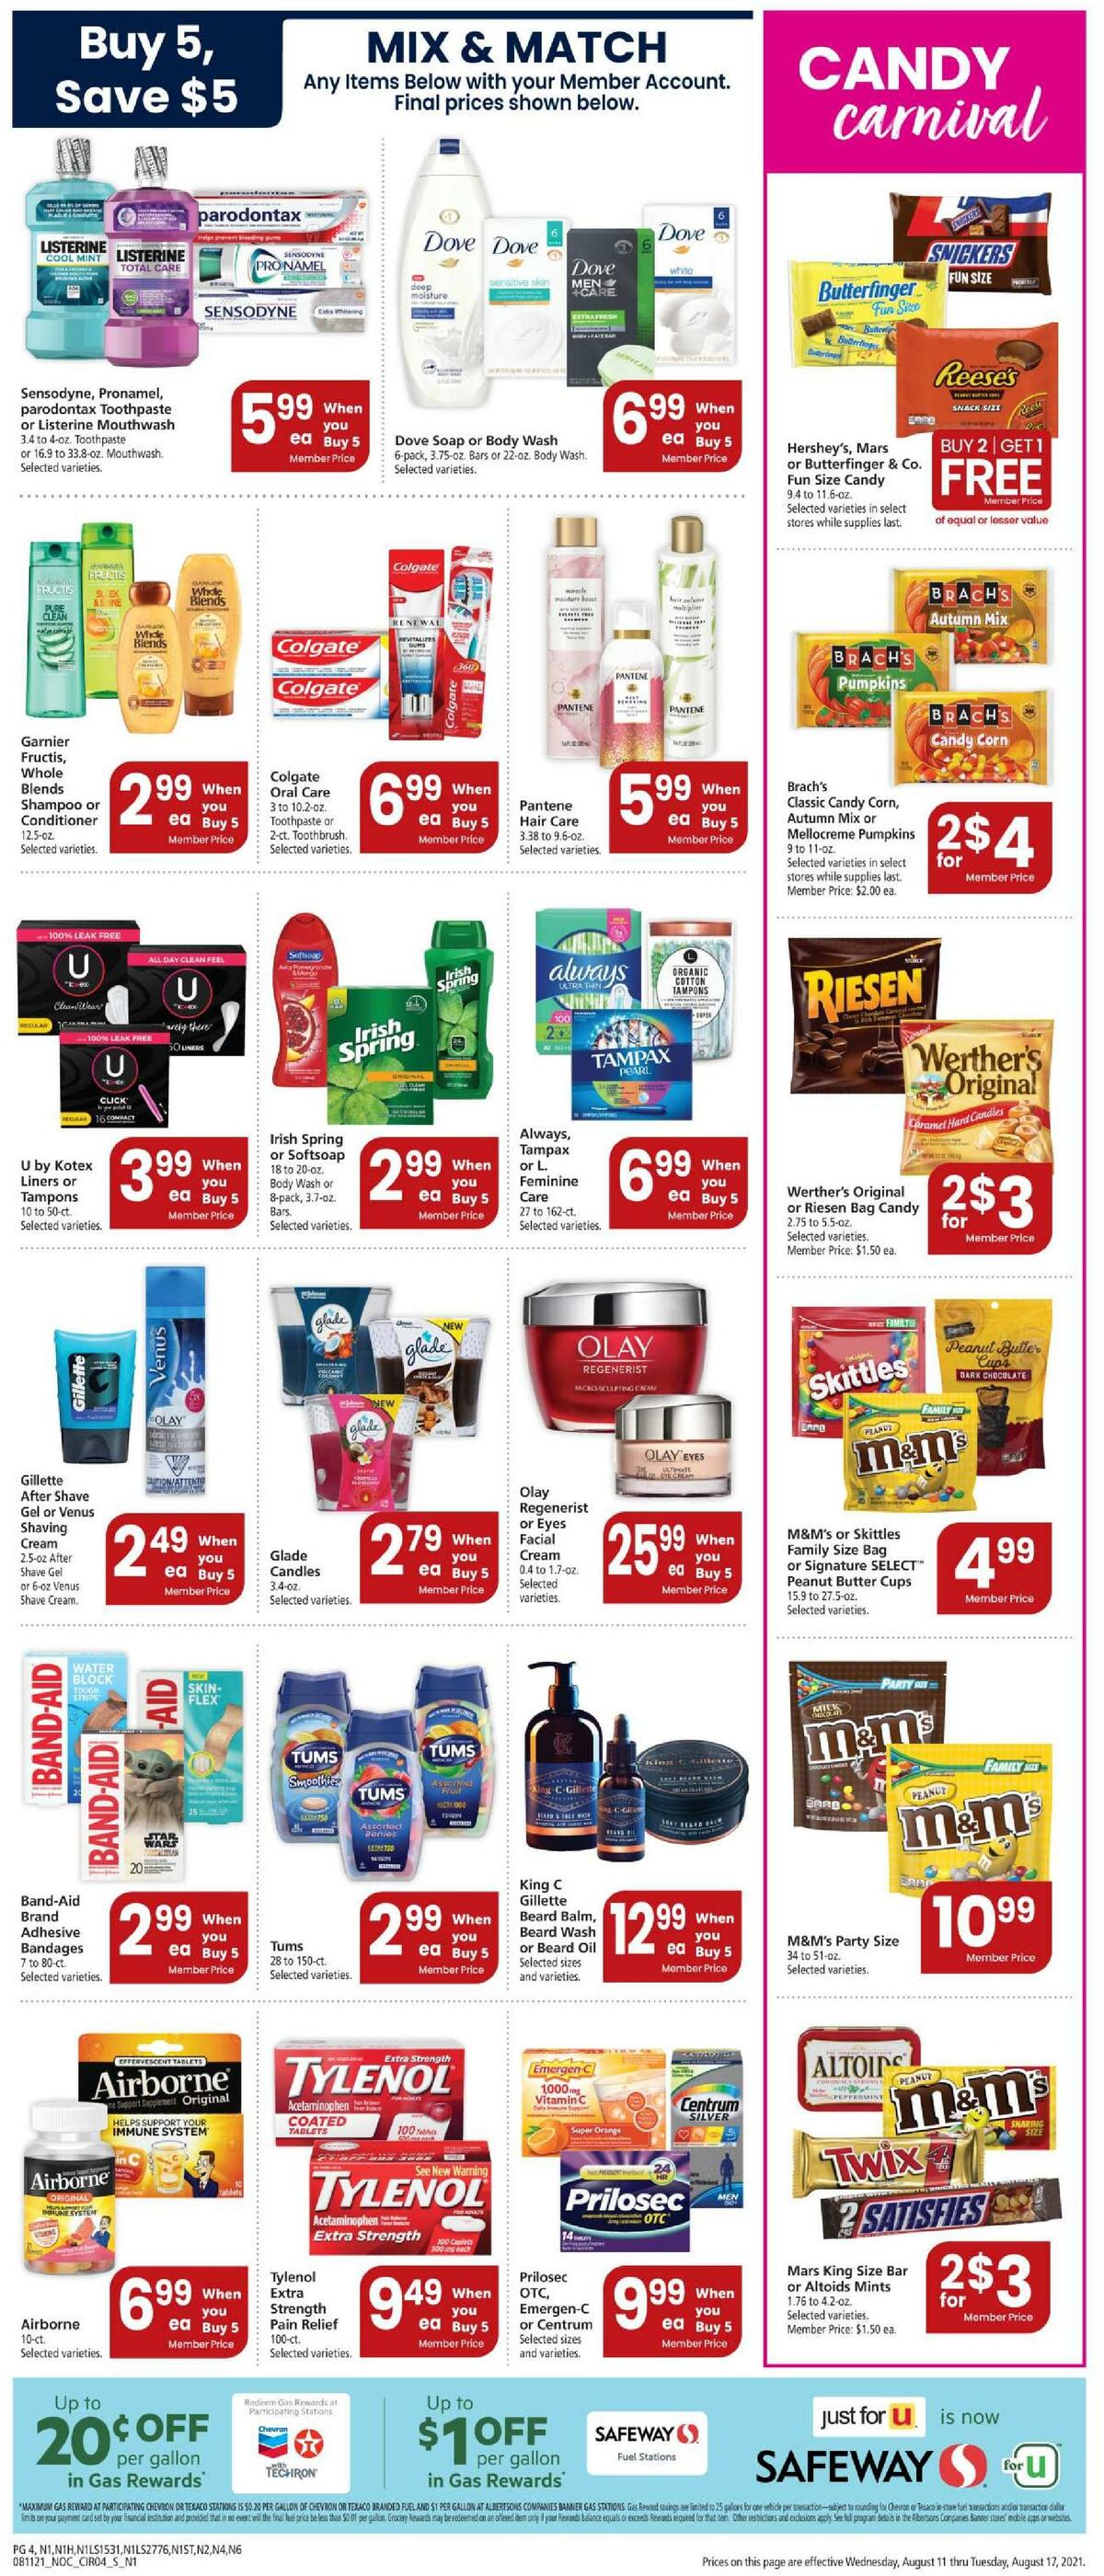 Safeway Weekly Ad from August 11